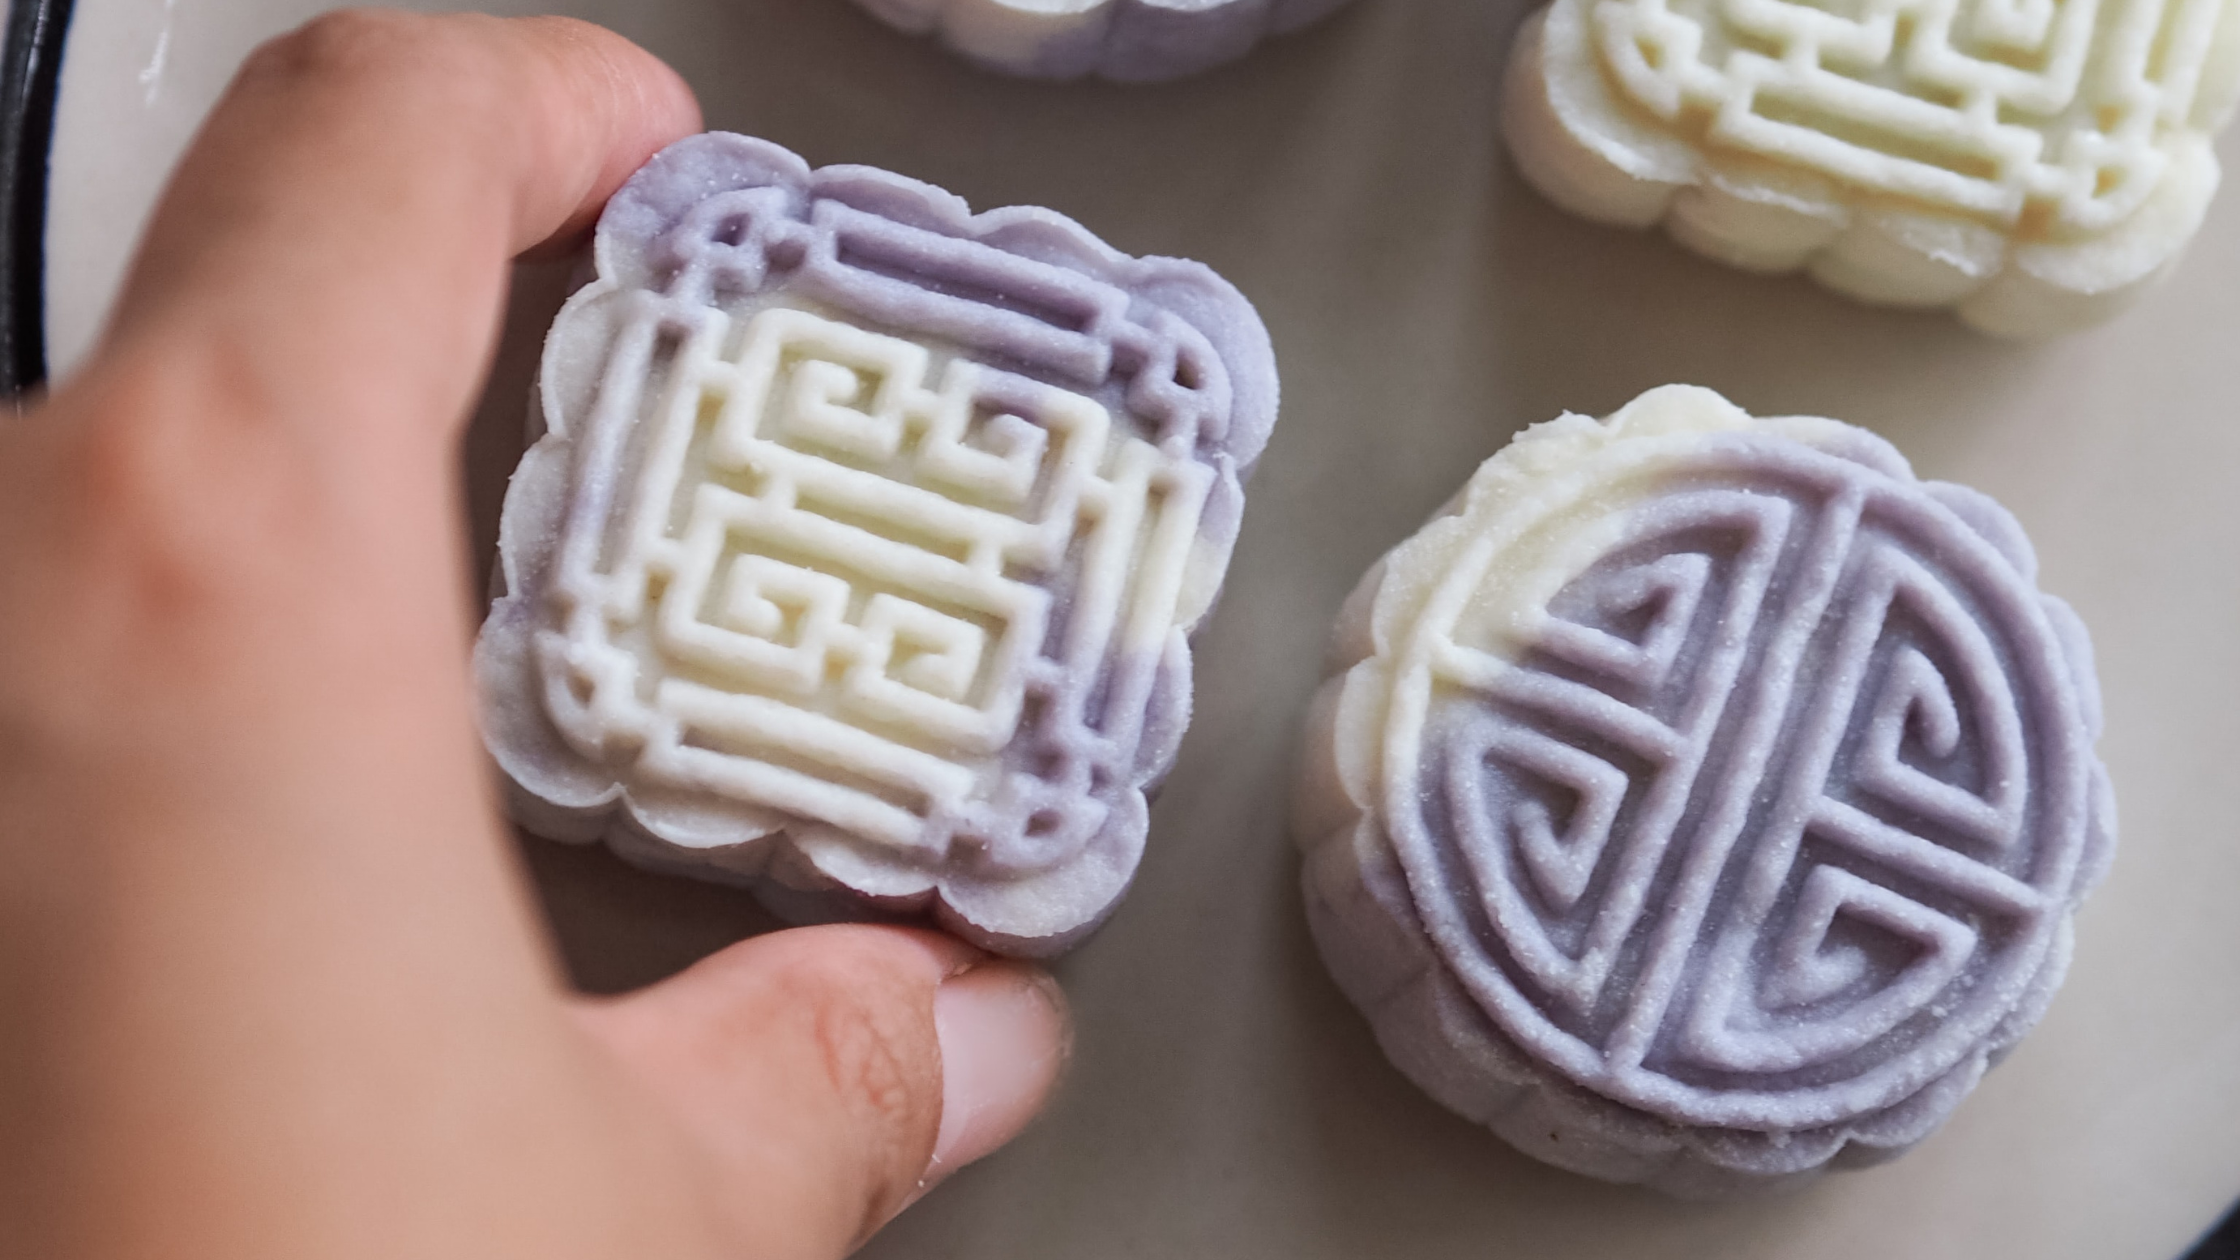 What's your favourite pairing while enjoying mooncakes during this